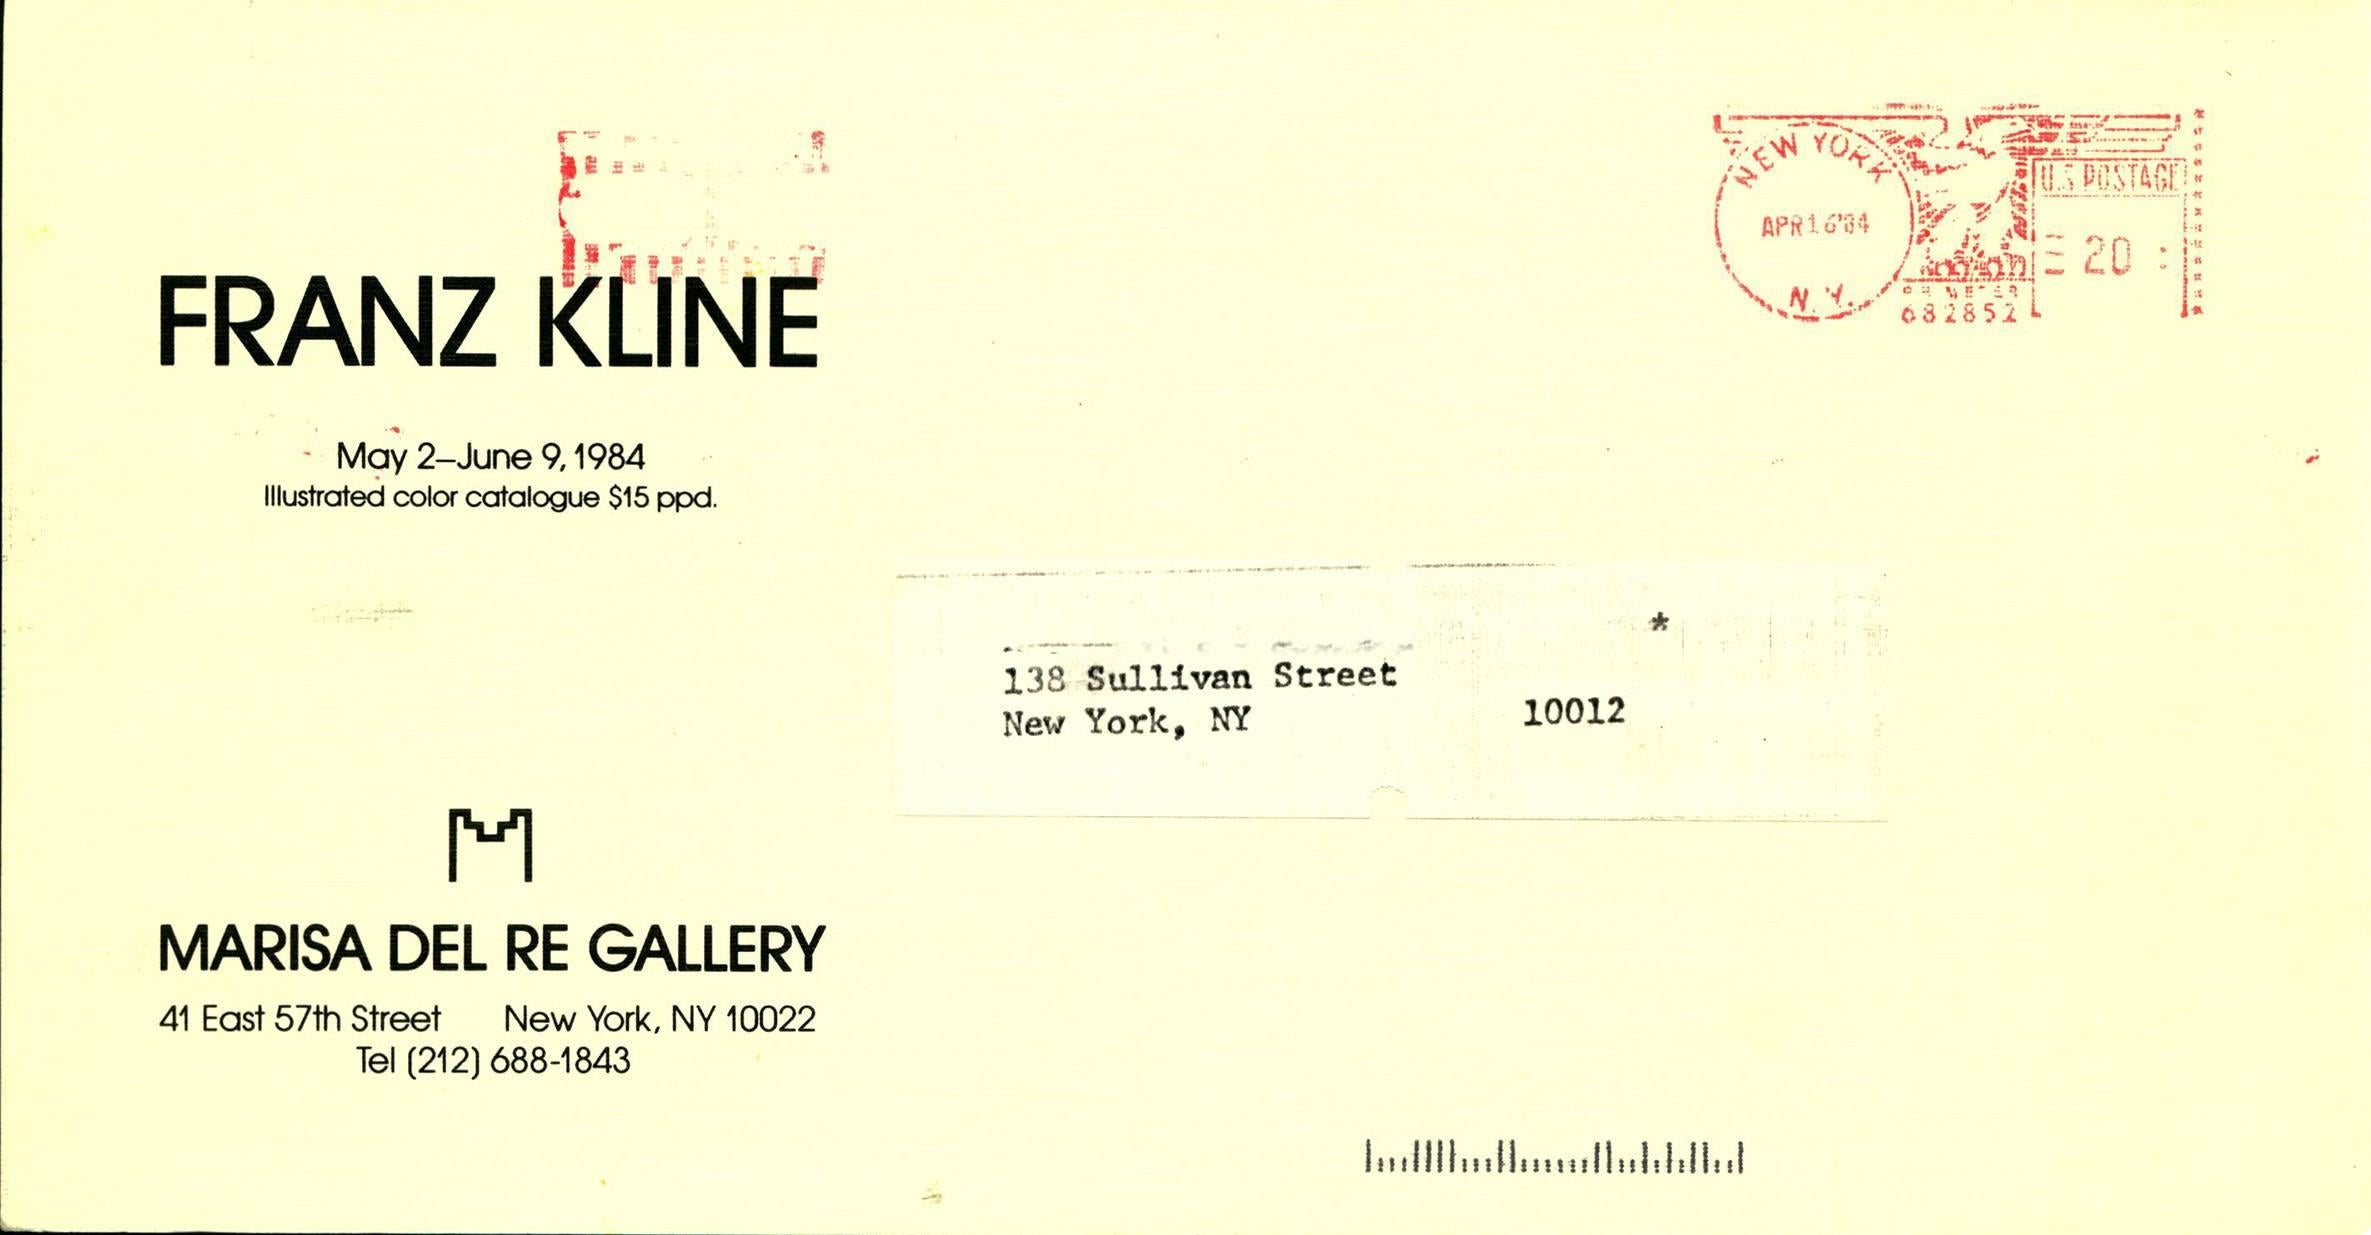 Franz Kline at Marissa Del Re Gallery, 1984
Vintage original announcement card
Well suited for framing 
Dimensions: 4 x 8 inches
Very good condition 

Abstract Expressionist Franz Kline is known for his large black-and-white paintings that treat the